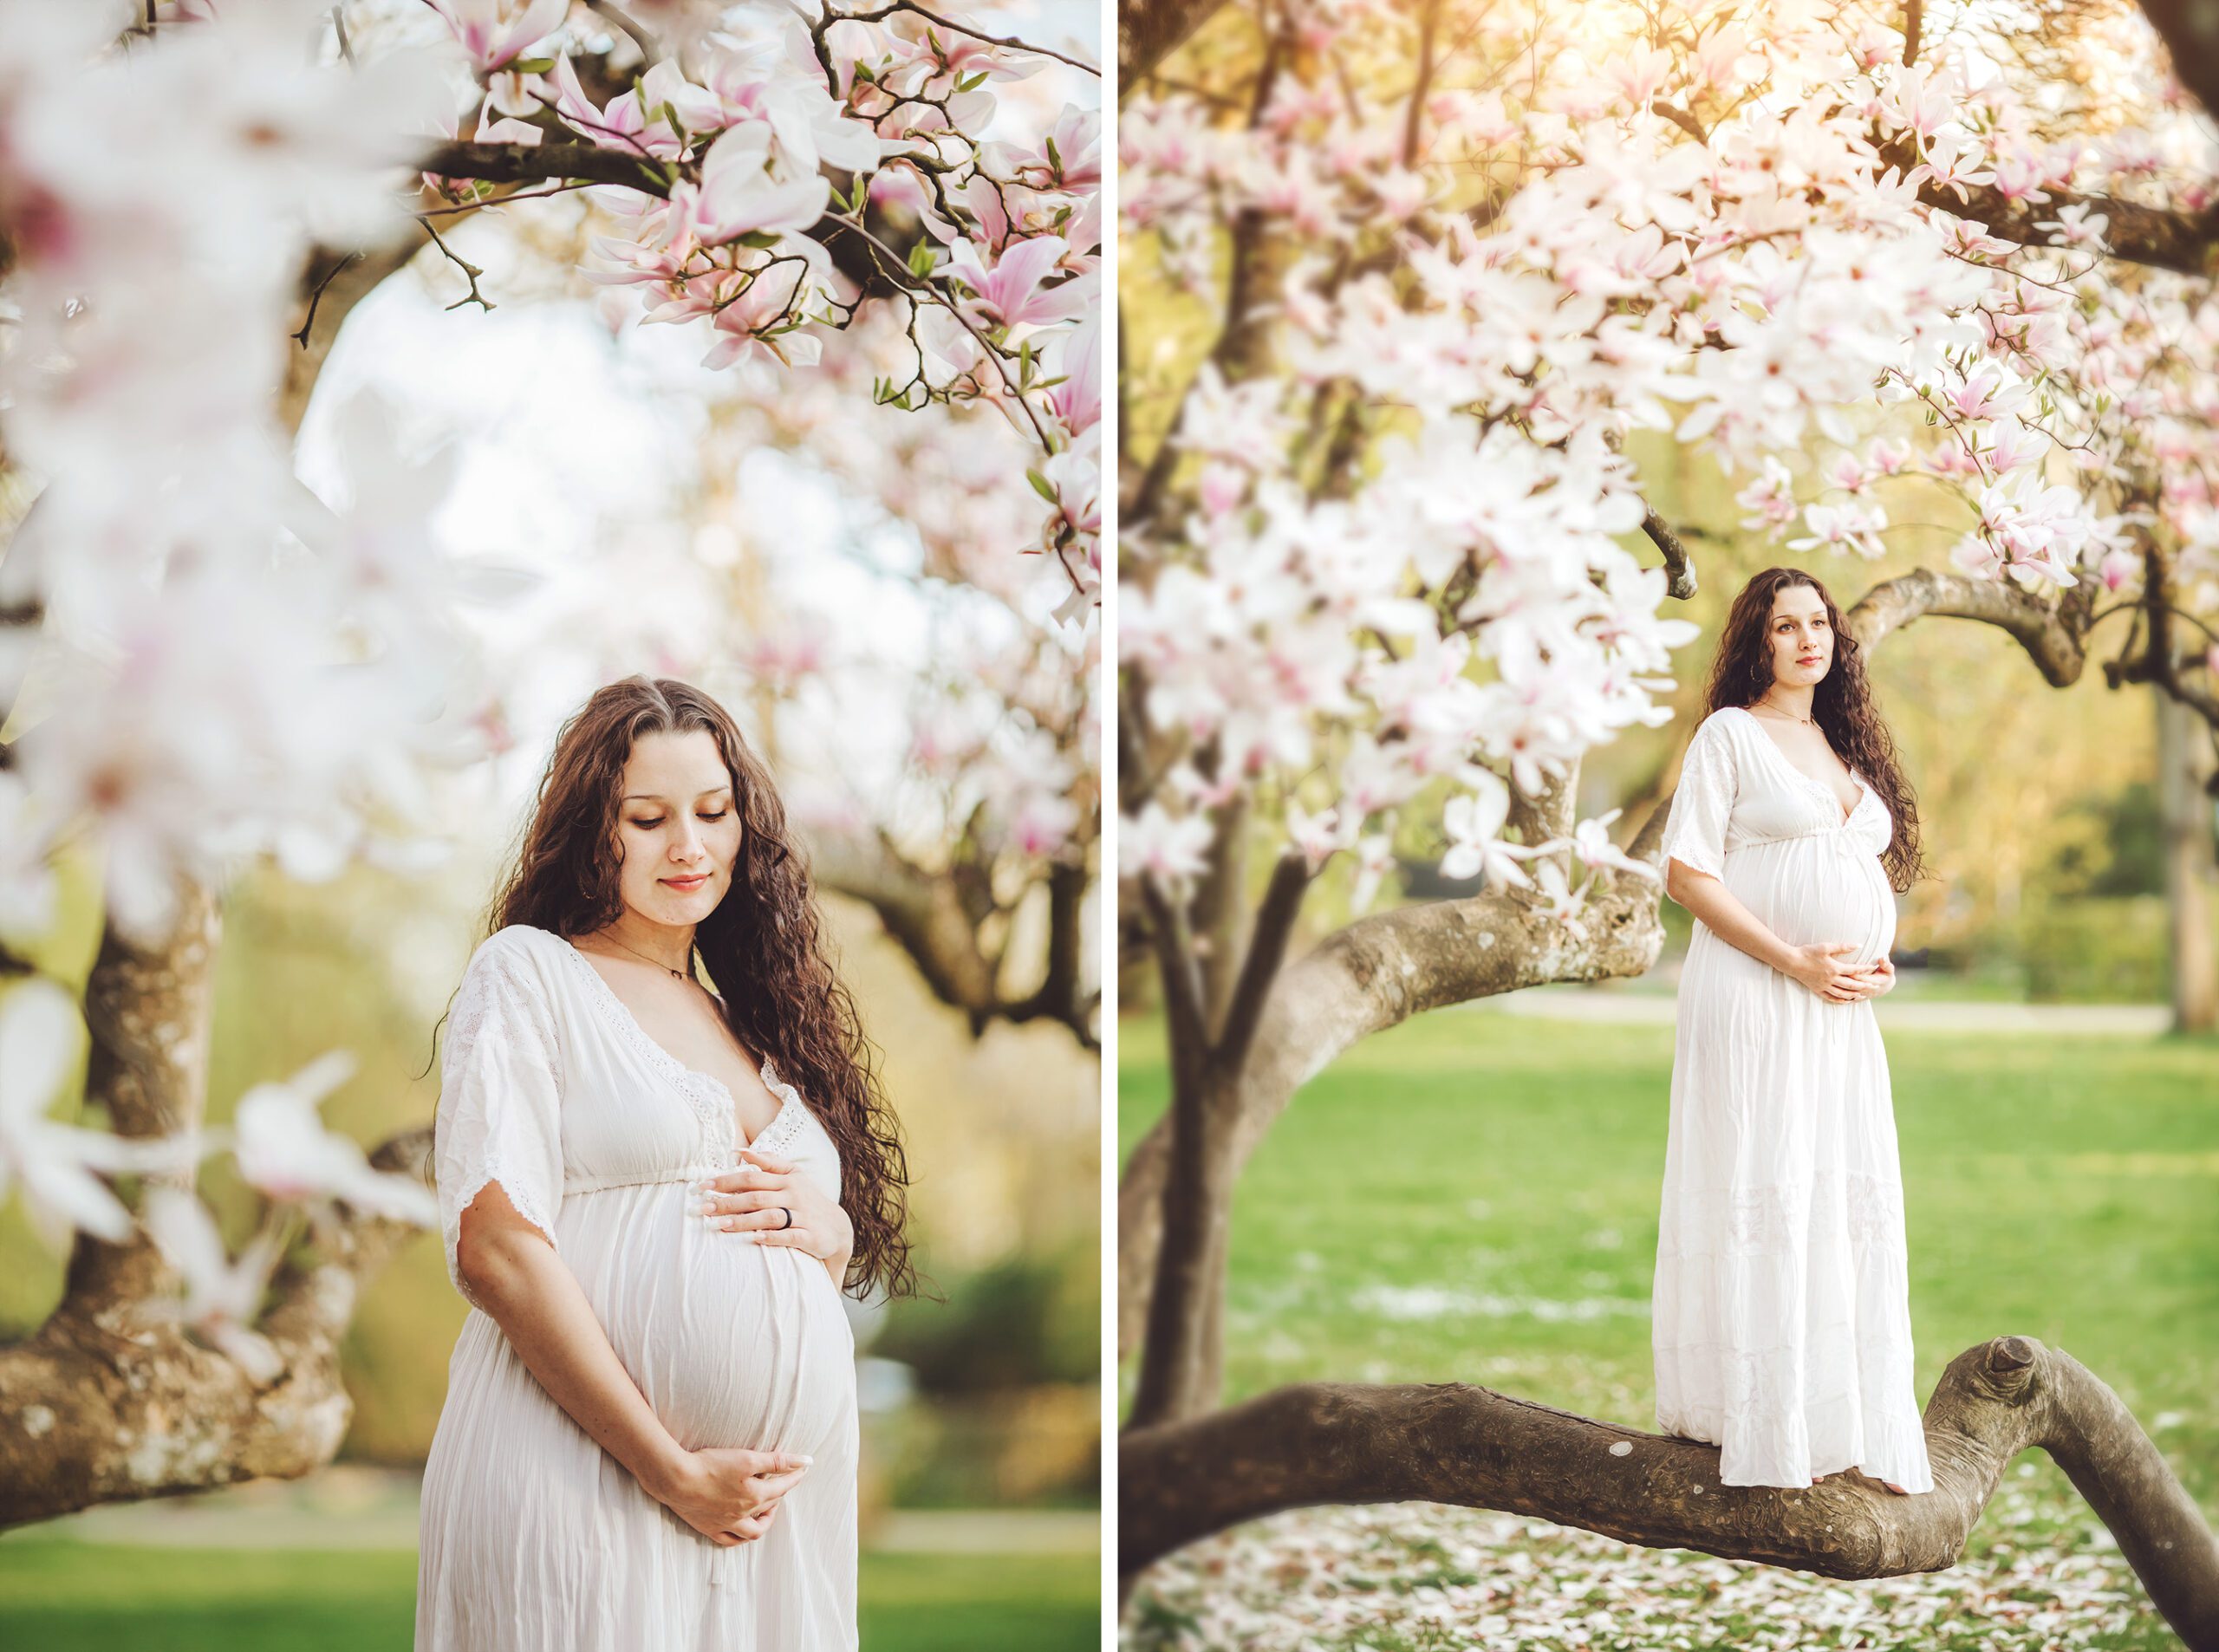 A magical spring tree for a magical maternity session.